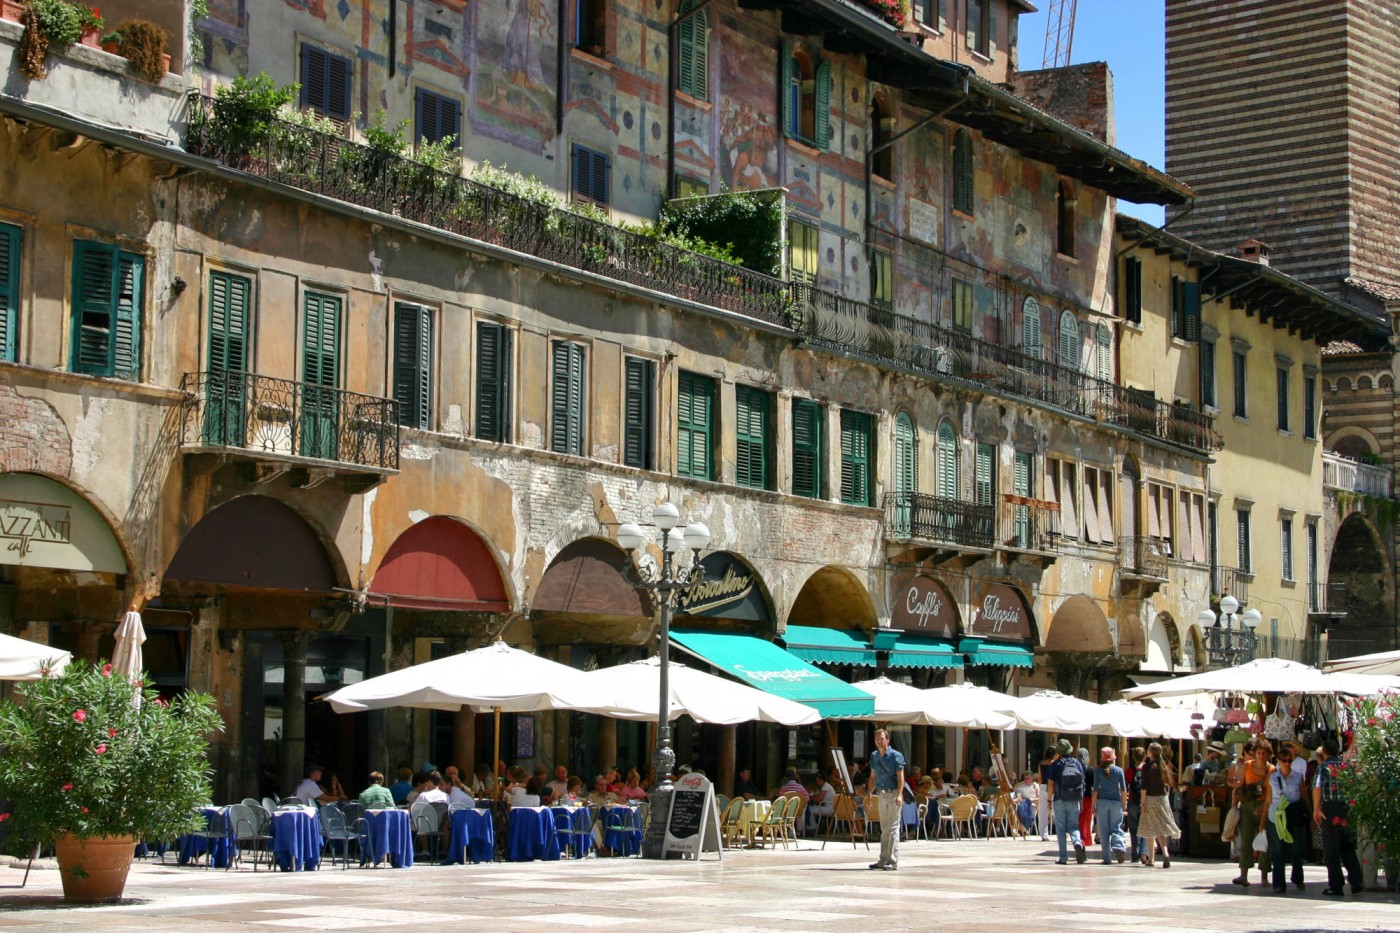 Piazza delle Erbe and its magnificent monuments